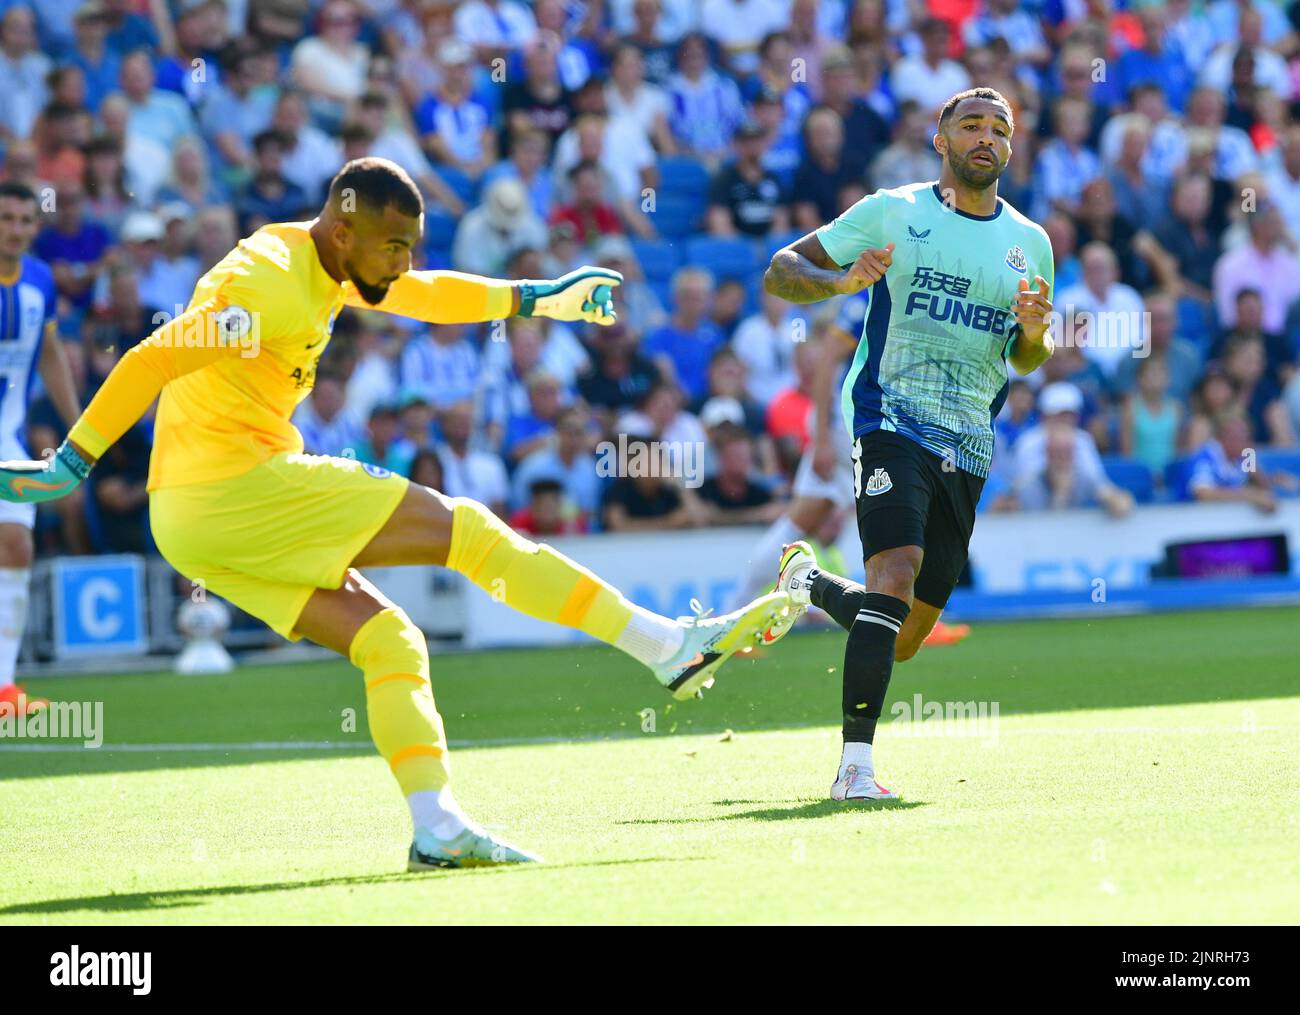 Brighton, UK. 13th Aug, 2022. Robert Sanchez Goalkeeper of Brighton and Hove Albion clears the ball from an incoming Callum Wilson of Newcastle United during the Premier League match between Brighton & Hove Albion and Newcastle United at The Amex on August 13th 2022 in Brighton, England. (Photo by Jeff Mood/phcimages.com) Credit: PHC Images/Alamy Live News Stock Photo